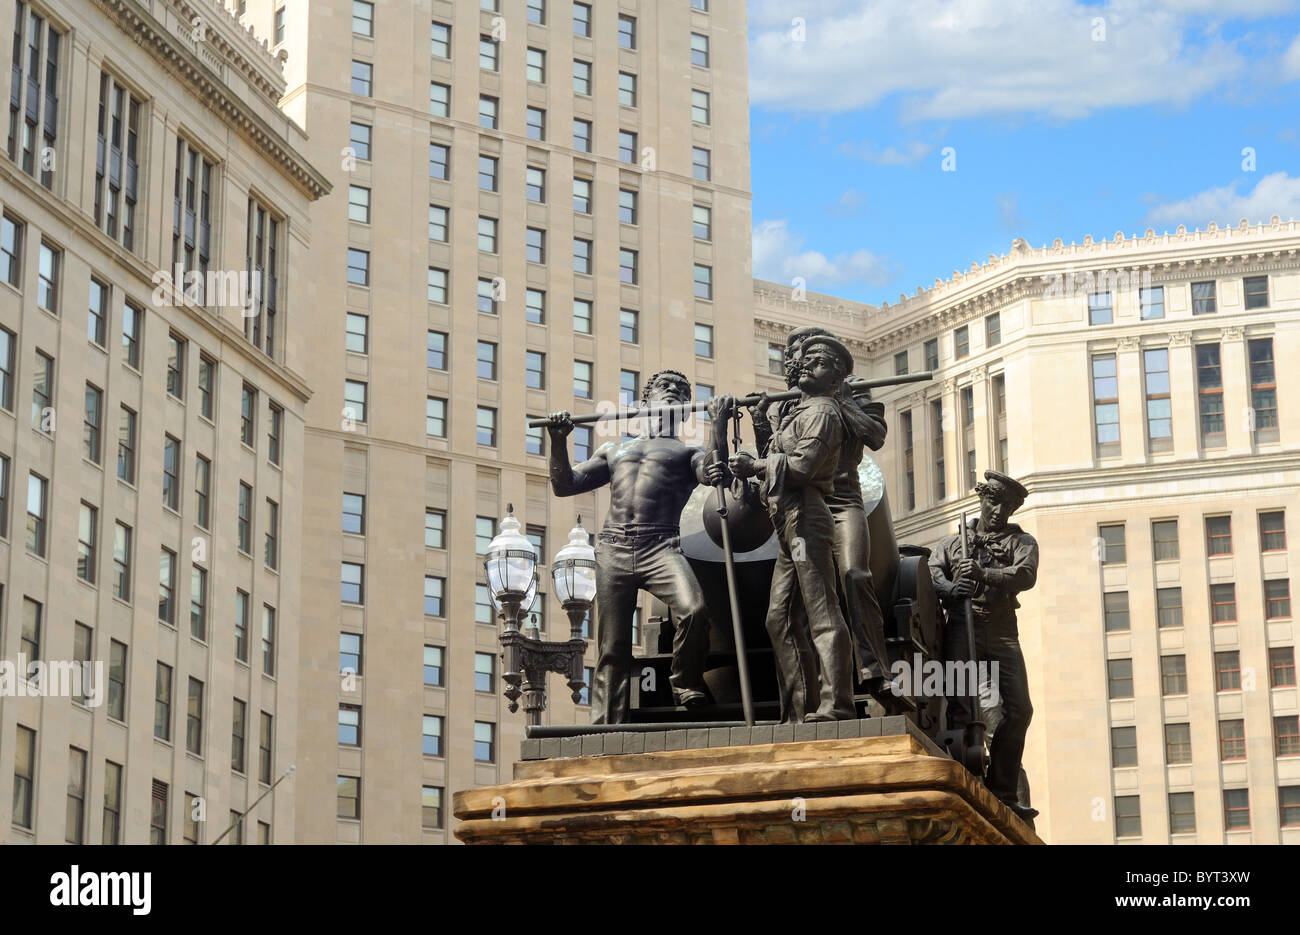 Cleveland Ohio's Terminal Tower looming over statuary on the Soldiers and Sailors Monument (Civil War, erected in 1894) Stock Photo